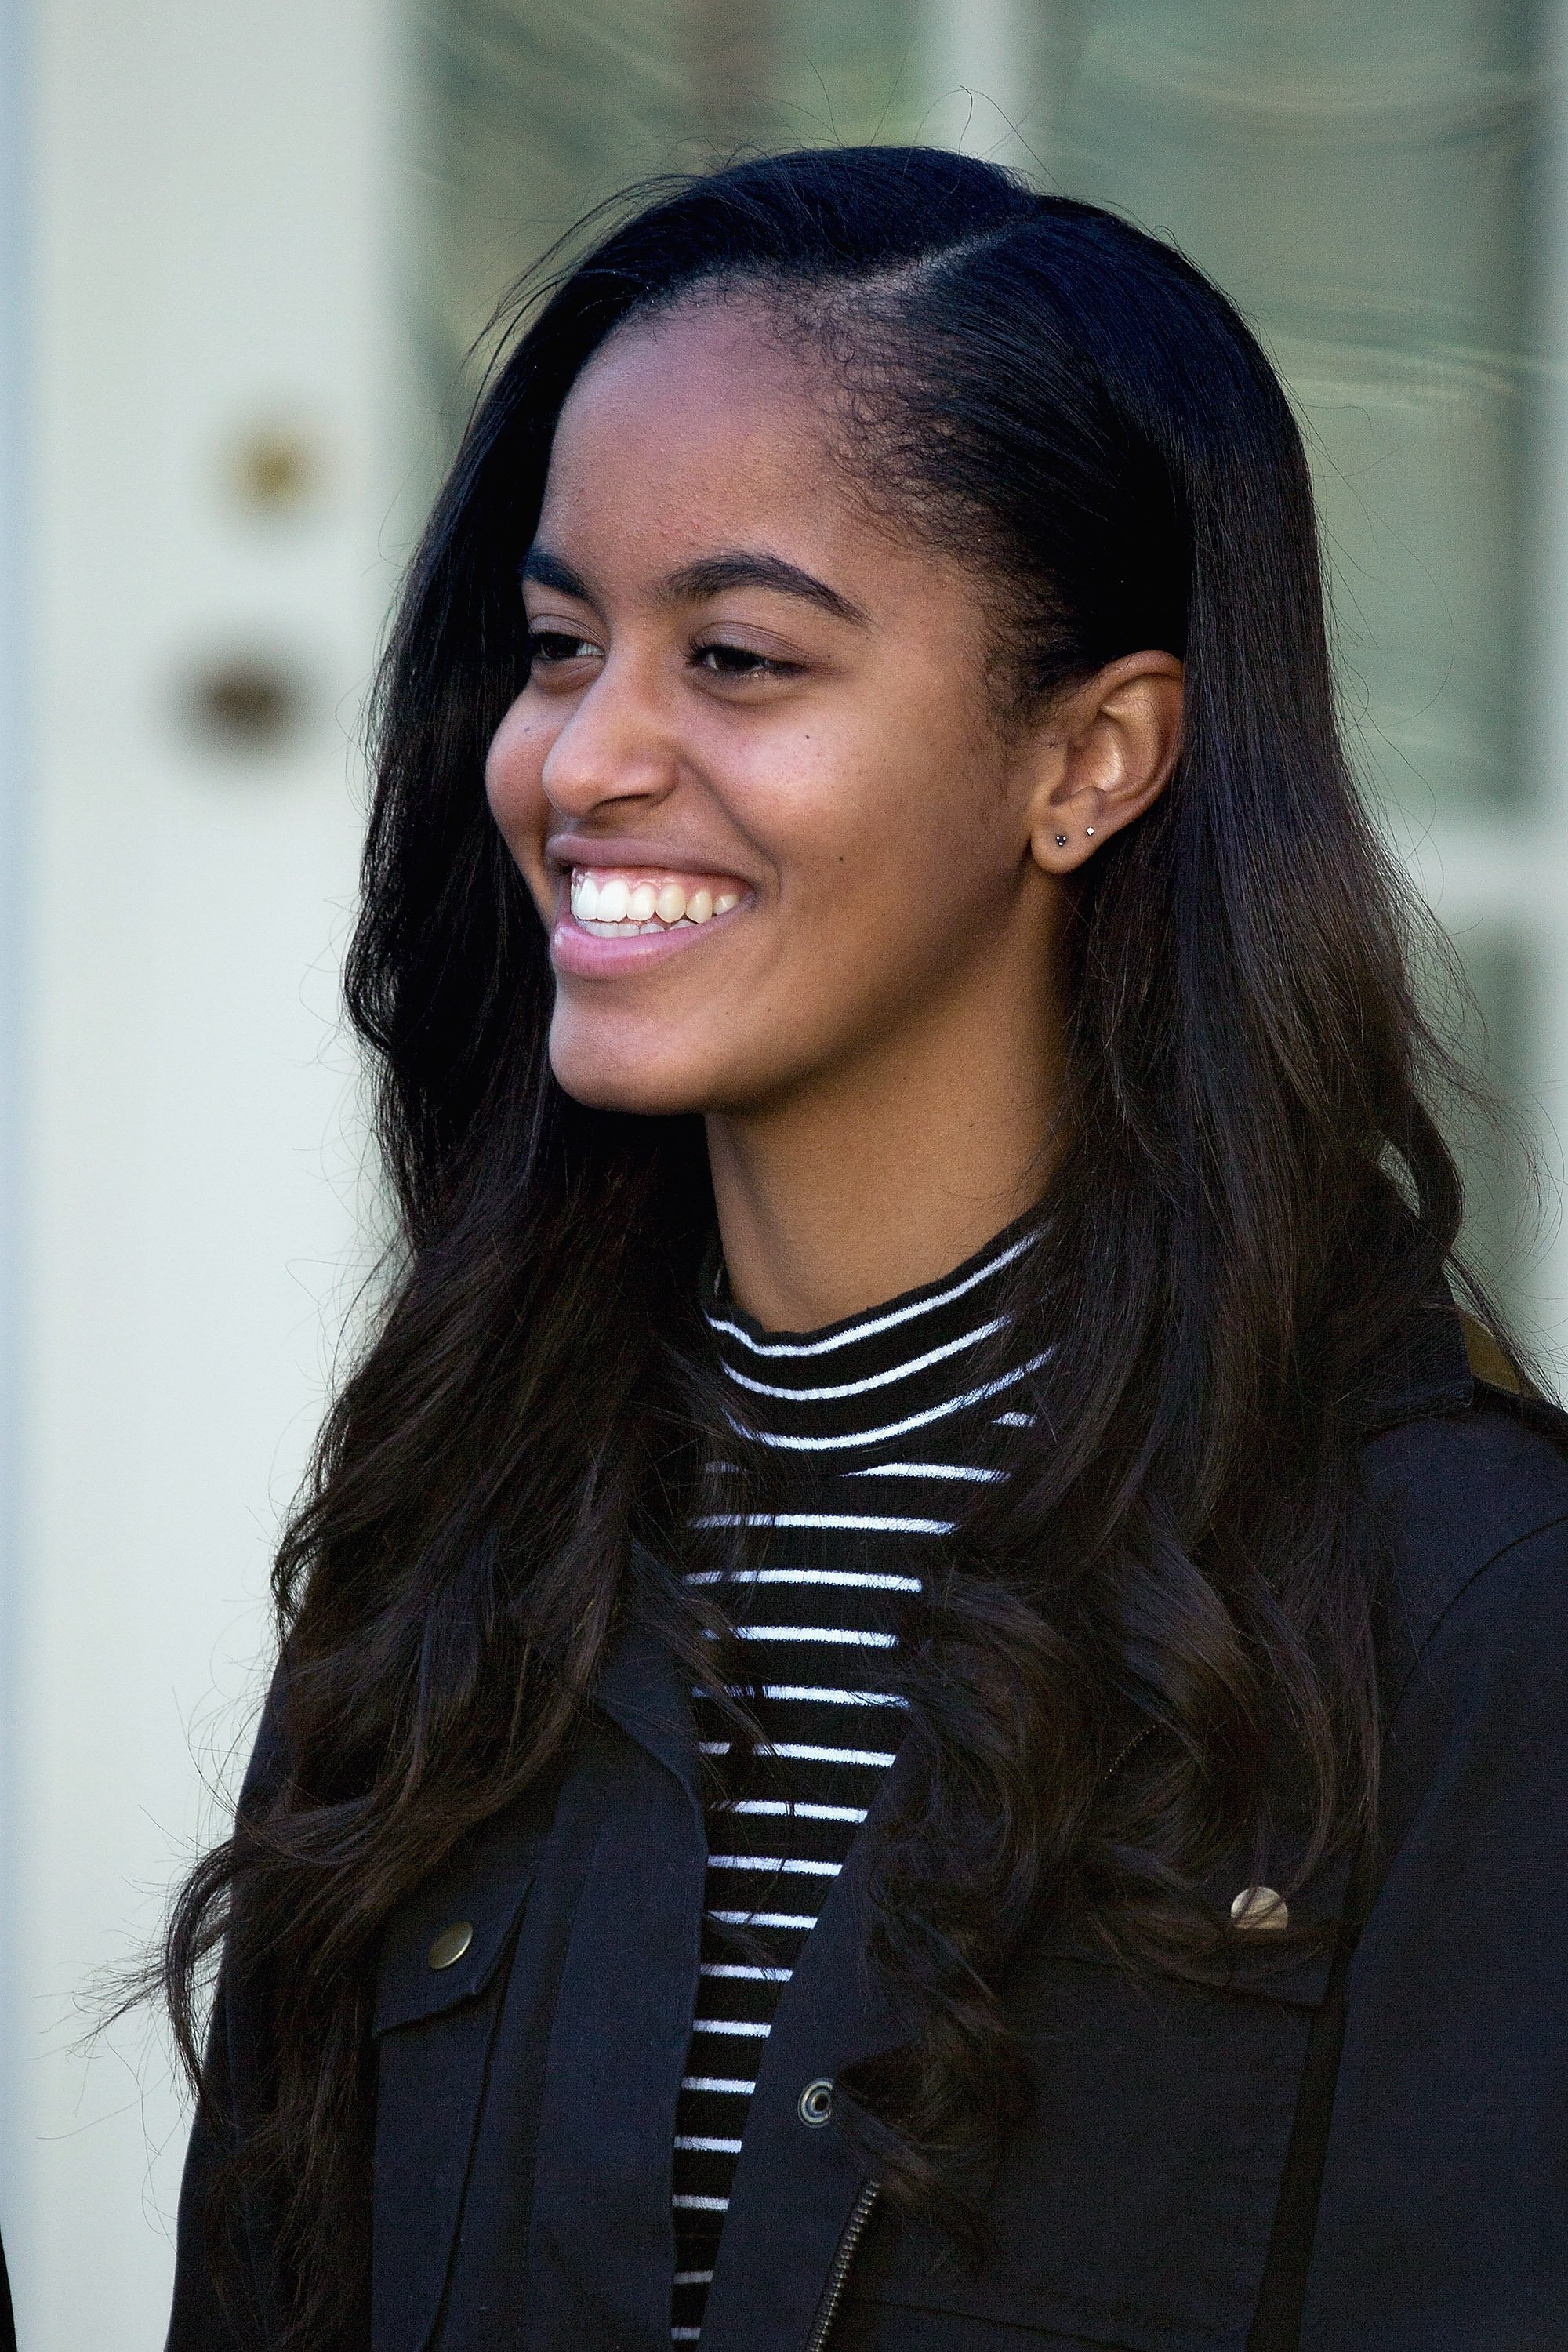 Malia Obama attending the turkey pardoning ceremony in November 2015 | Photo: Getty Images